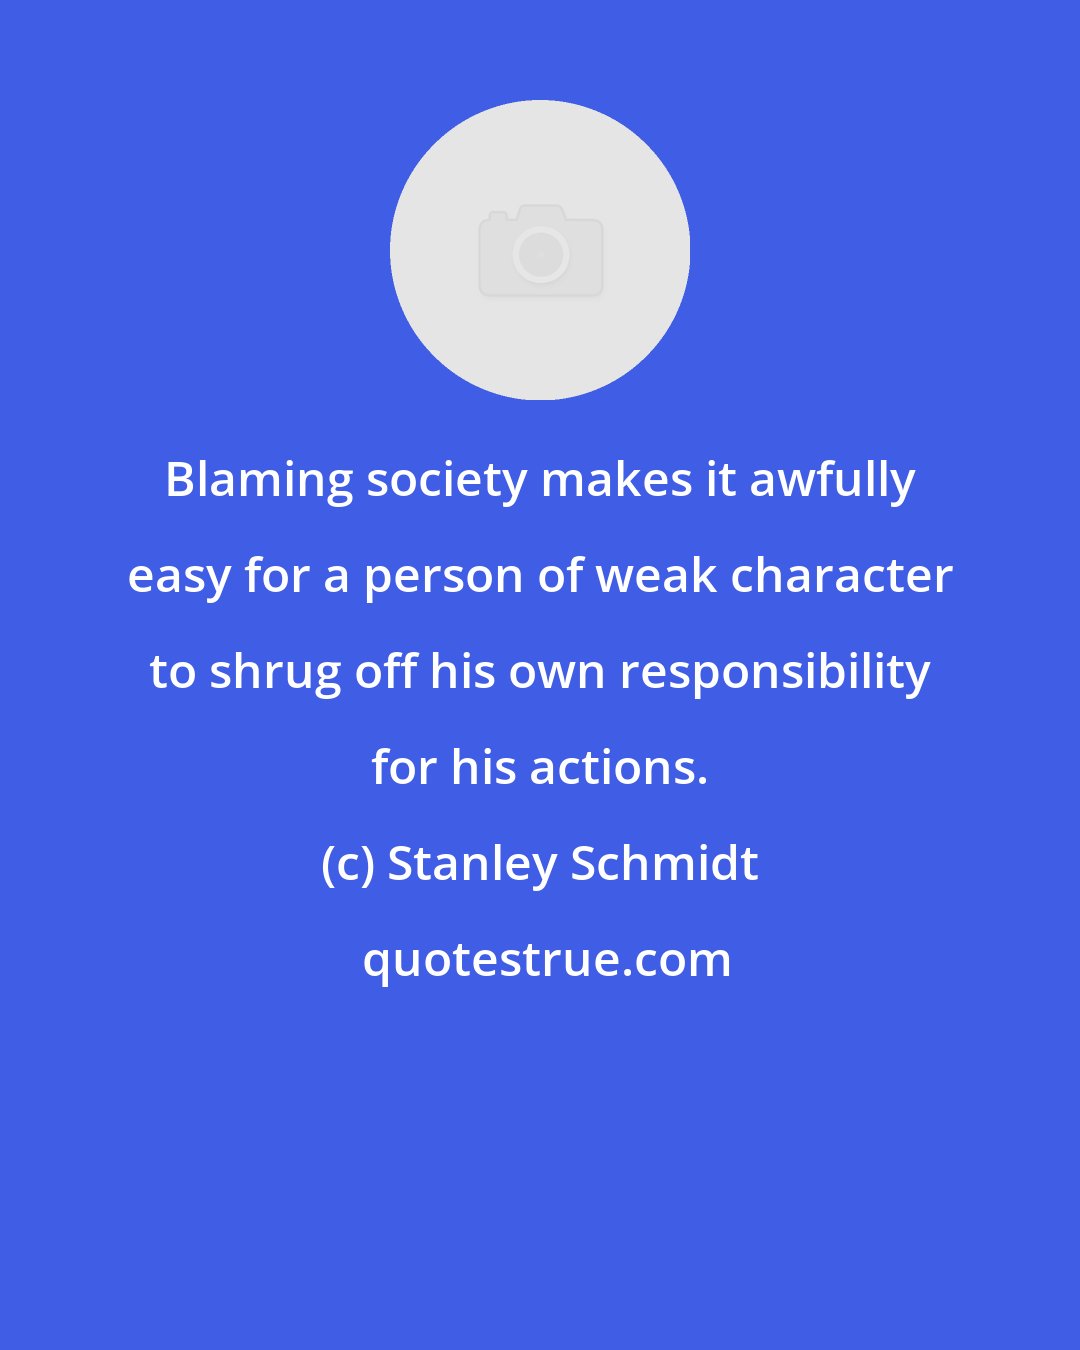 Stanley Schmidt: Blaming society makes it awfully easy for a person of weak character to shrug off his own responsibility for his actions.